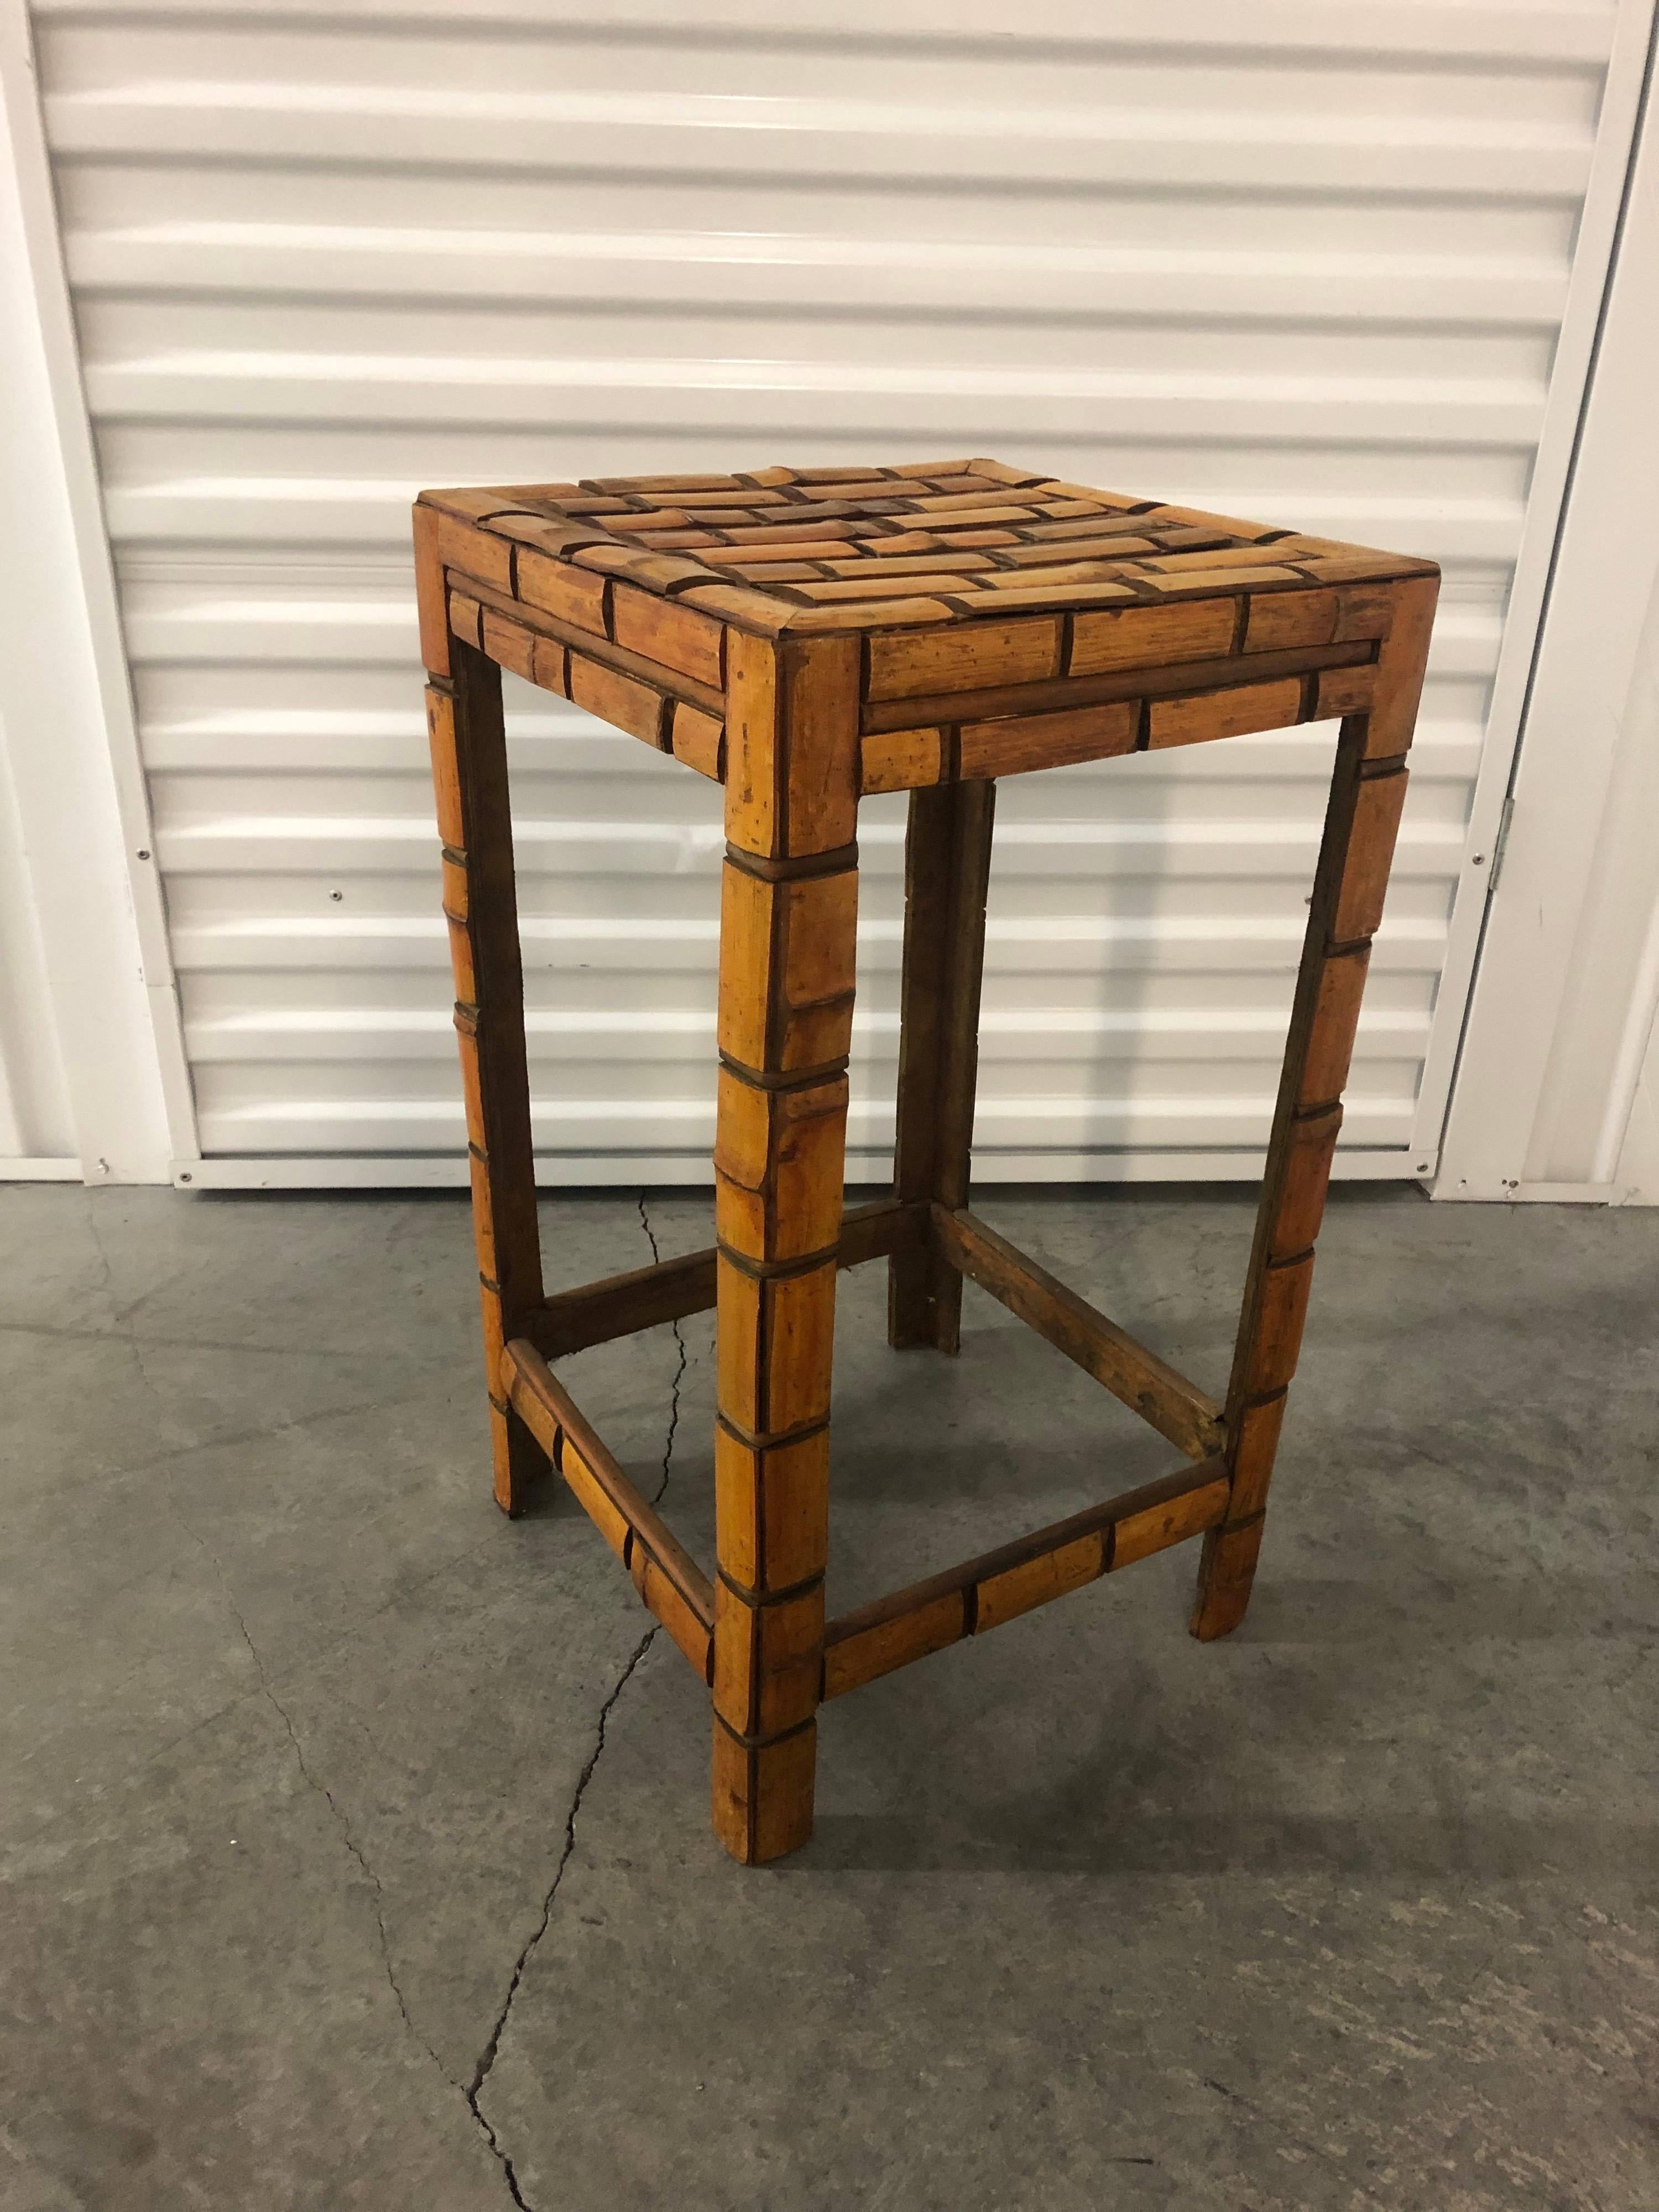 Slatted Asian bamboo small side table/stand
Finished on all sides.
Sizes: 9 1/4